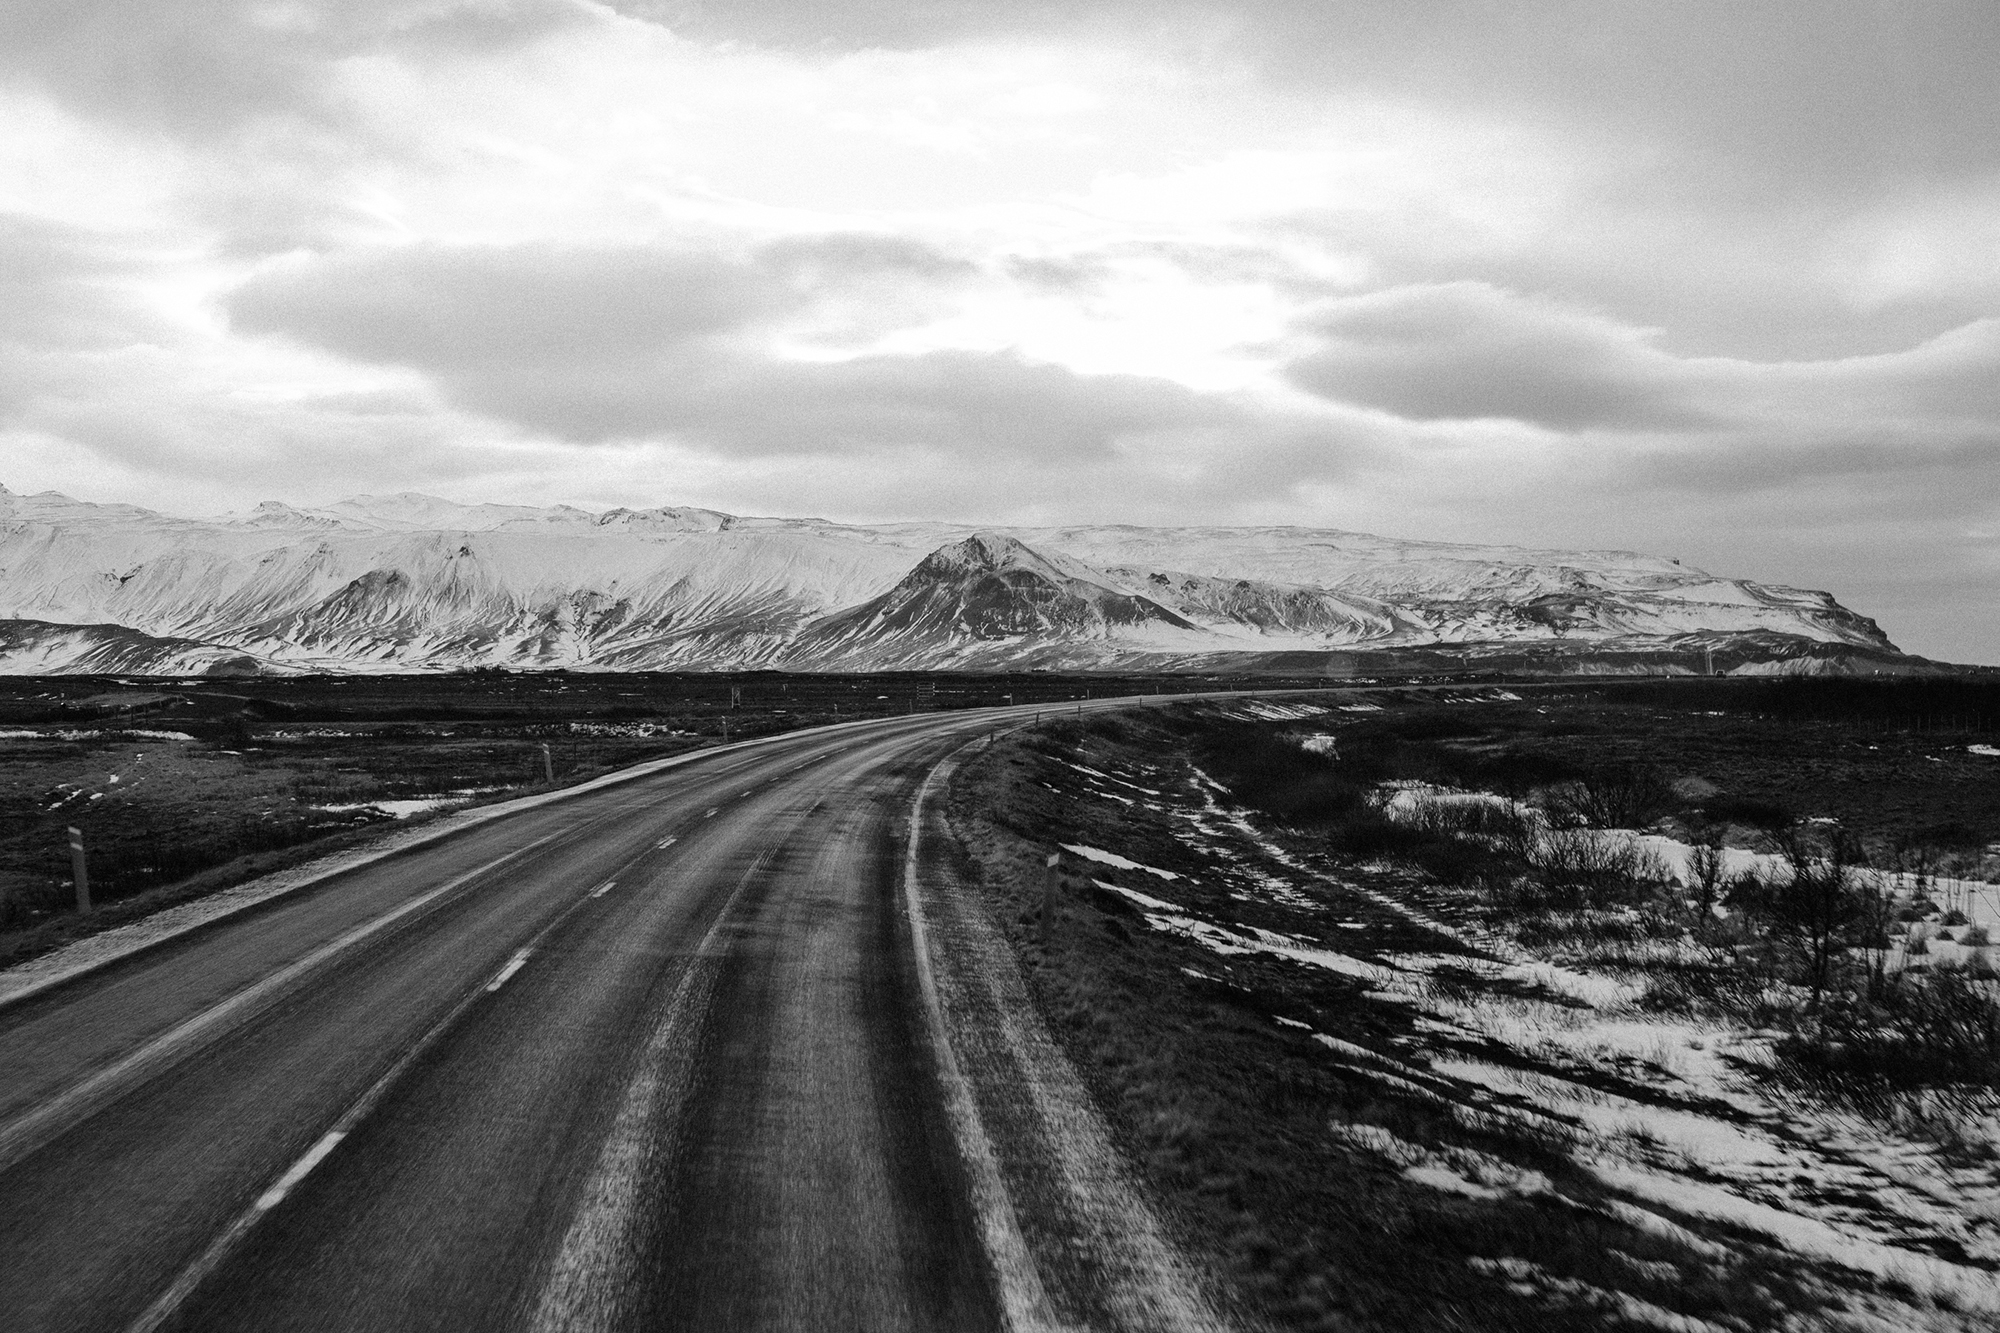 Seeing Iceland in monochrome